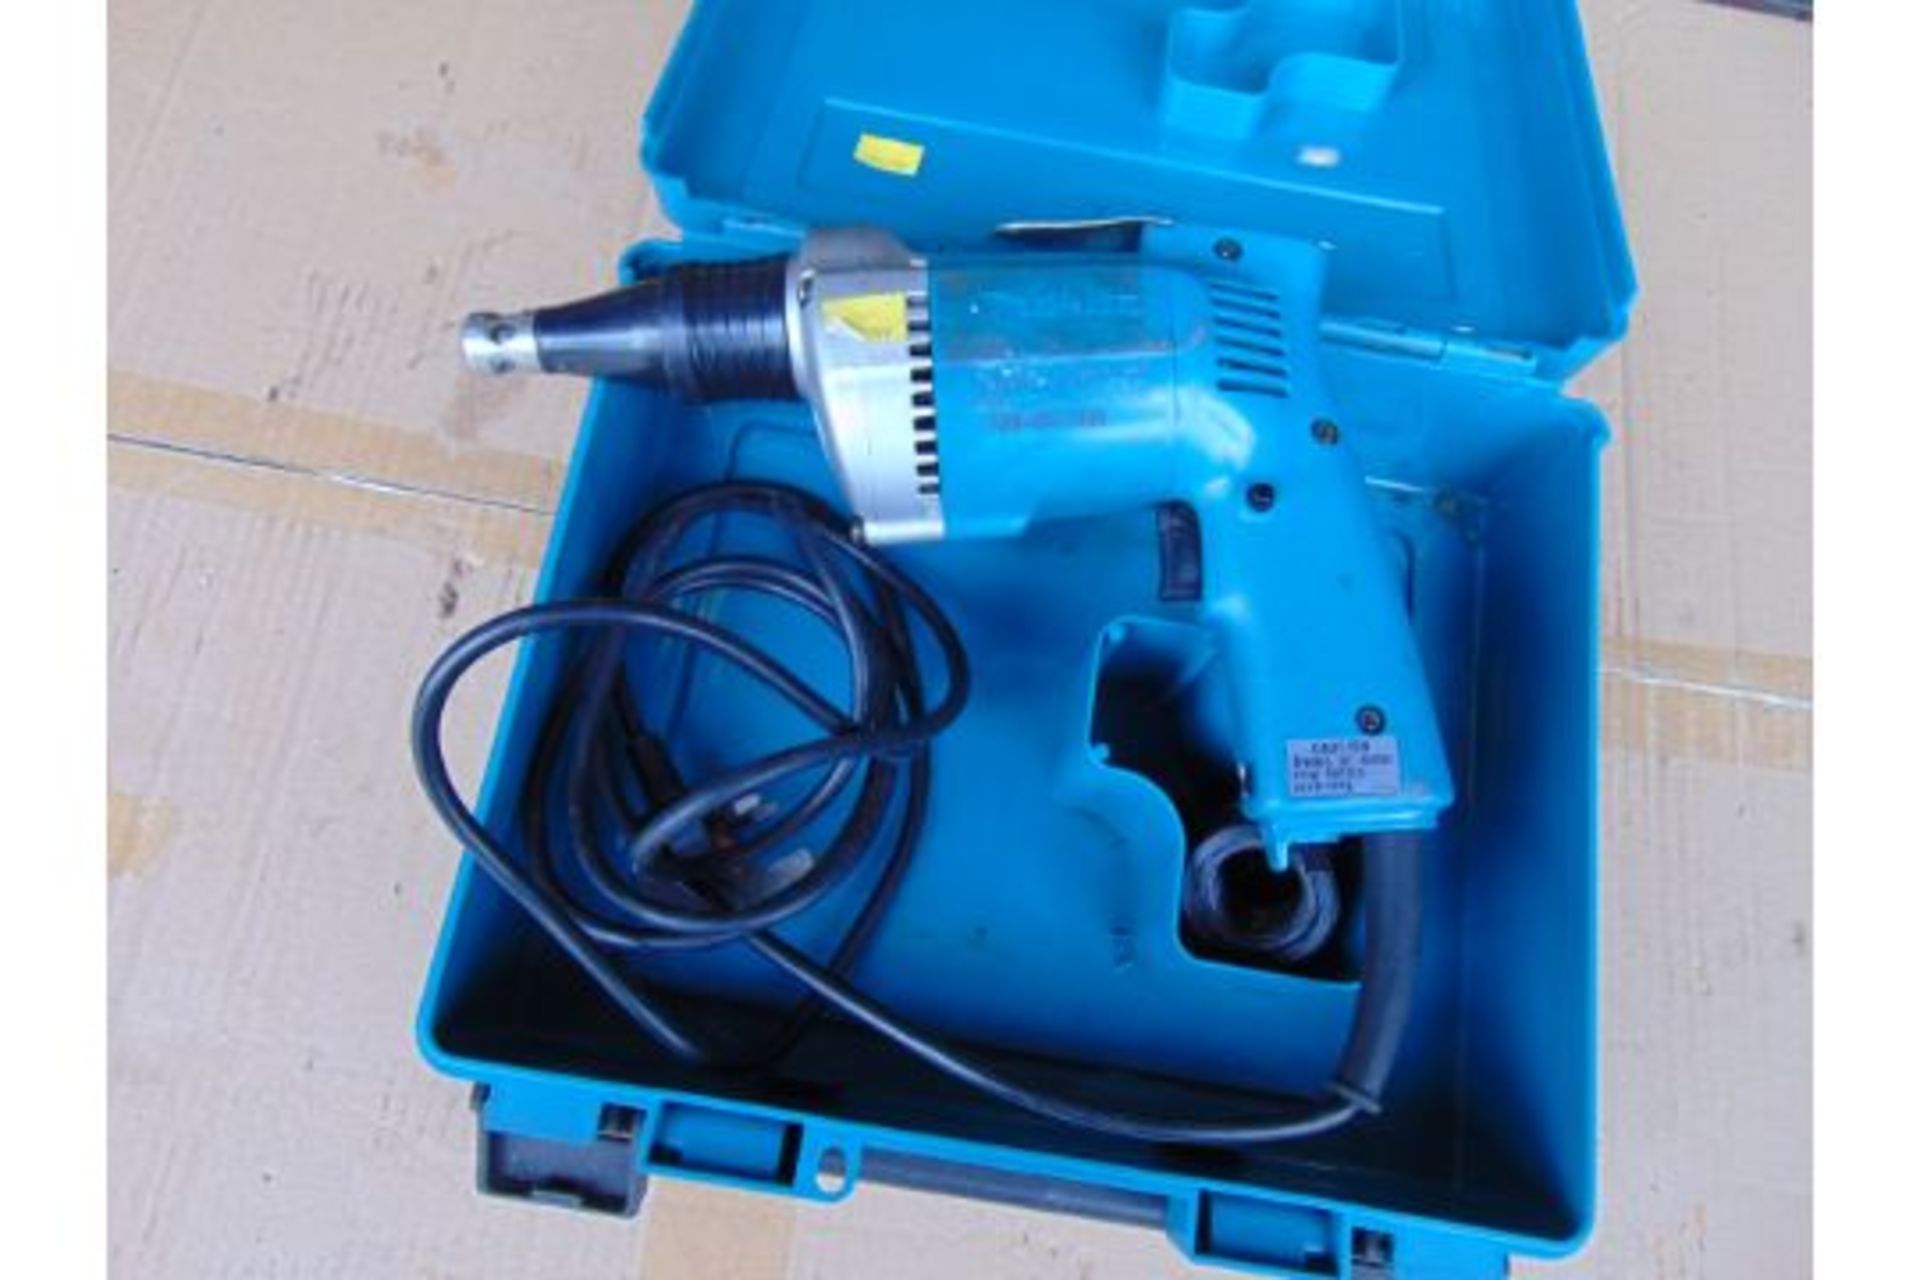 Makita 240v Model 6802BV Electric Wrench / Screw Driver from UK Fire Service Workshop in Case - Image 3 of 5